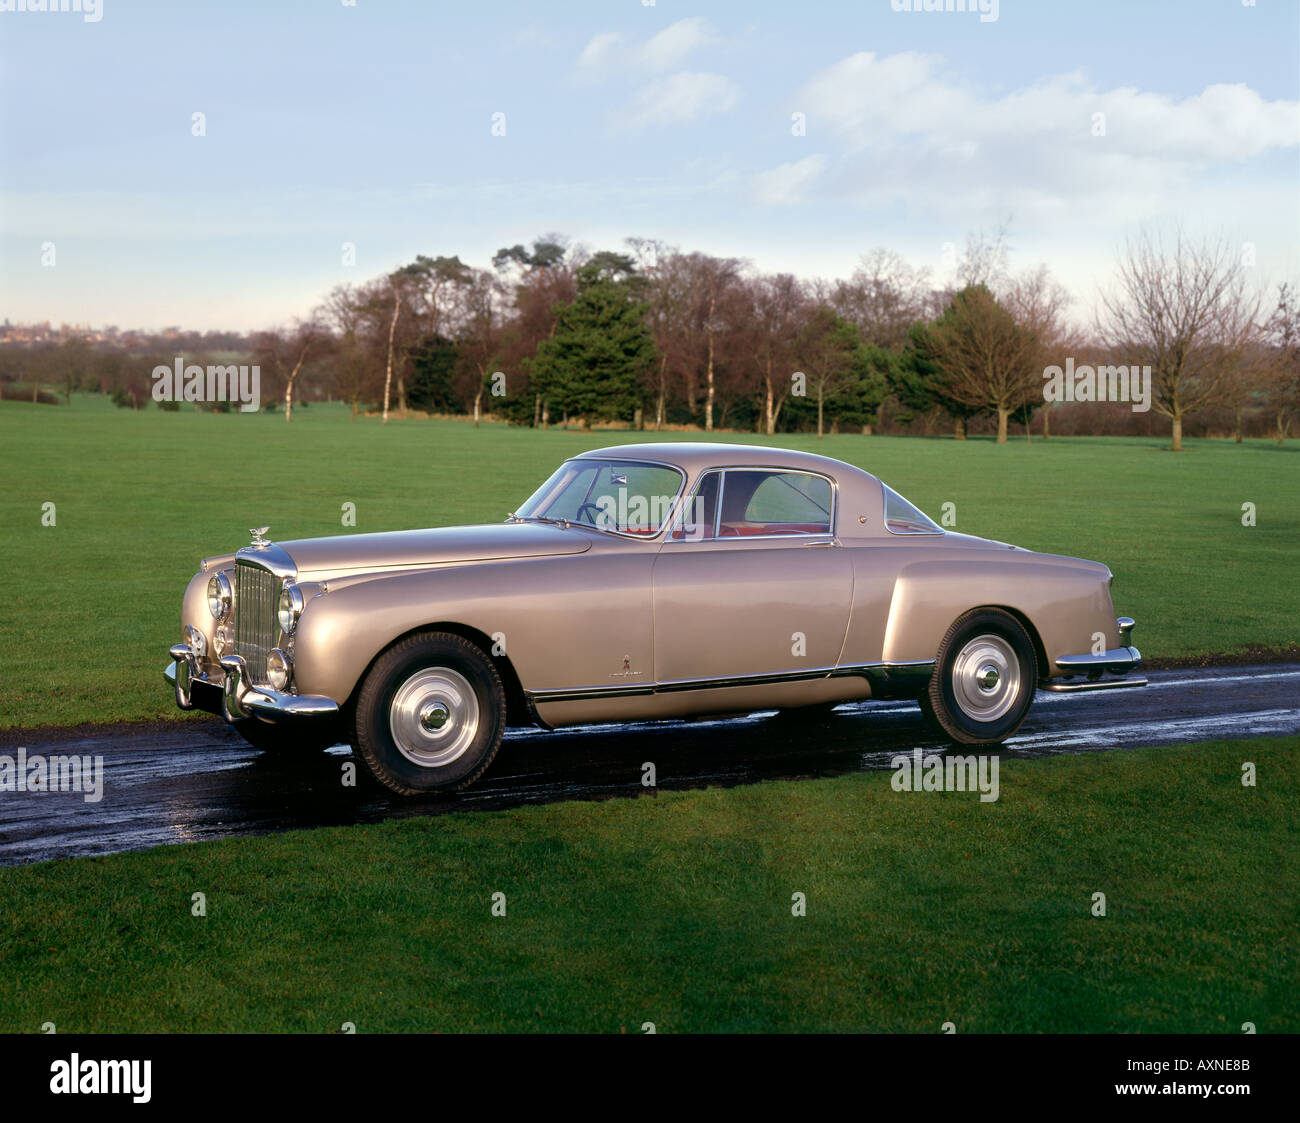 1954 Bentley R Type Continental 2 door sports coupe 5 0 litre 6 cylinder engine bodywork by Pininfarina Country of Origin UK Stock Photo